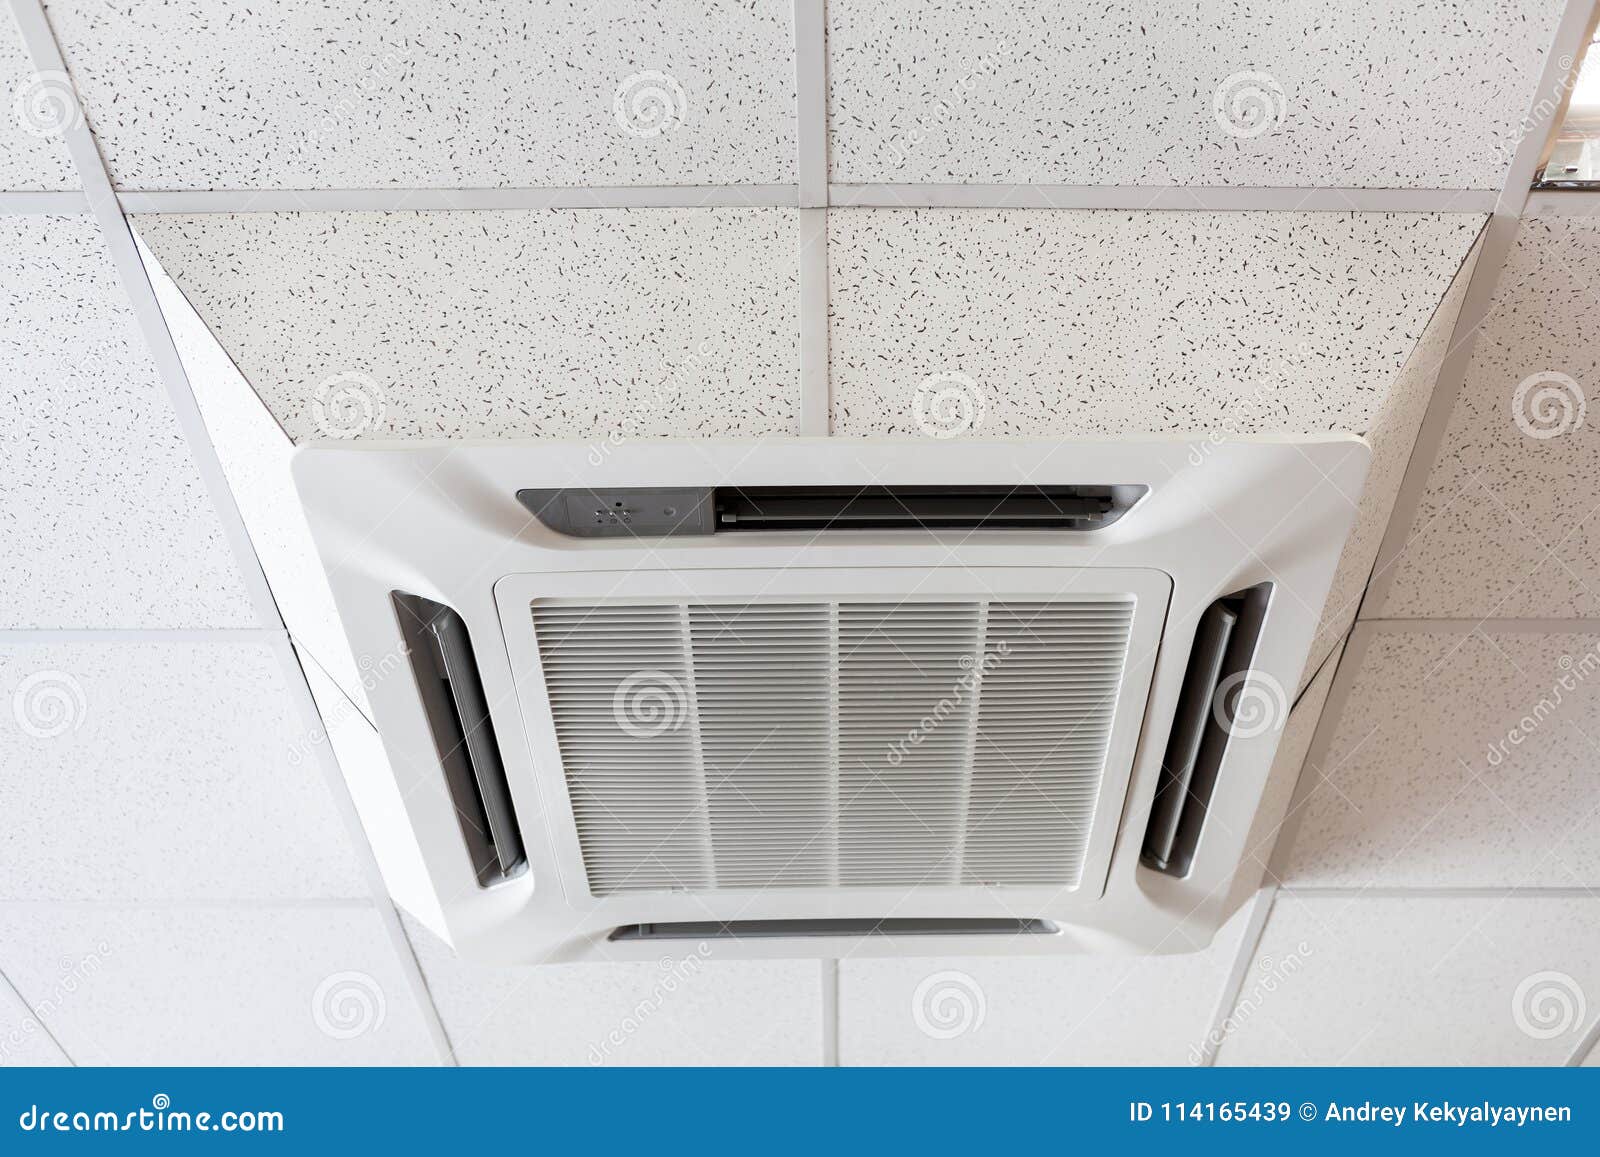 ceiling mounted large air-conditioner in office, close-up view